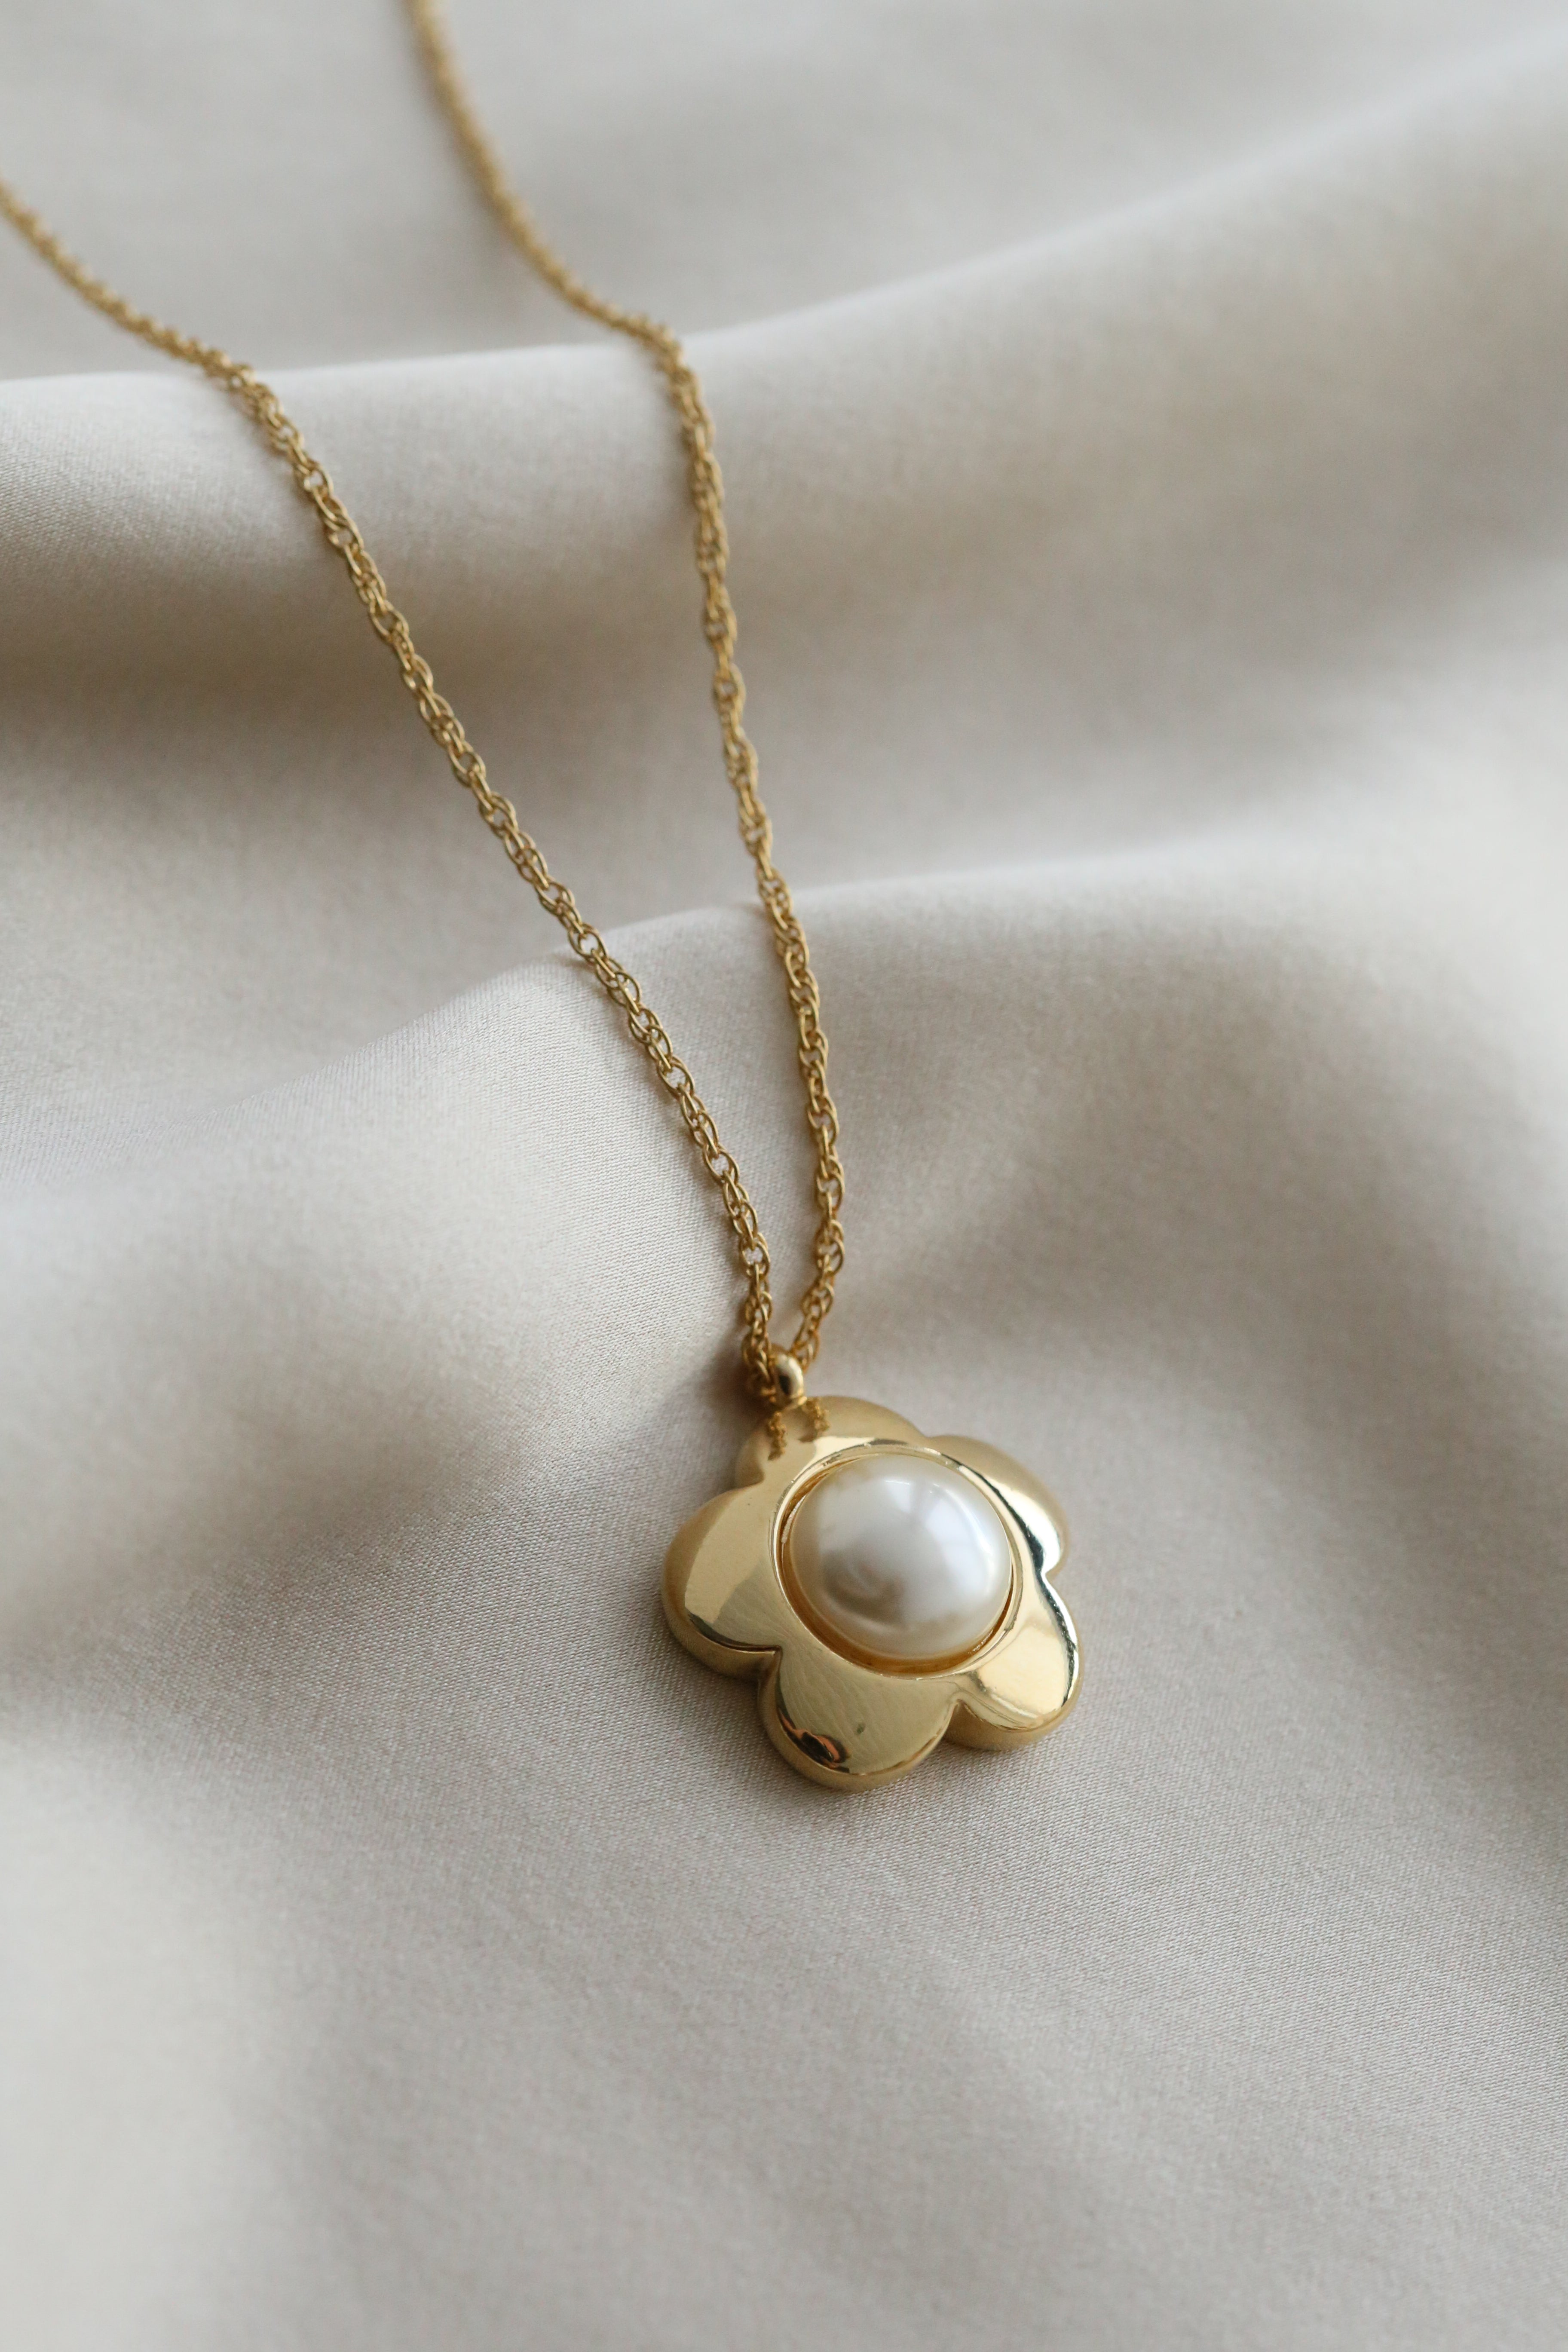 Venice (Vintage) Necklace - Boutique Minimaliste has waterproof, durable, elegant and vintage inspired jewelry